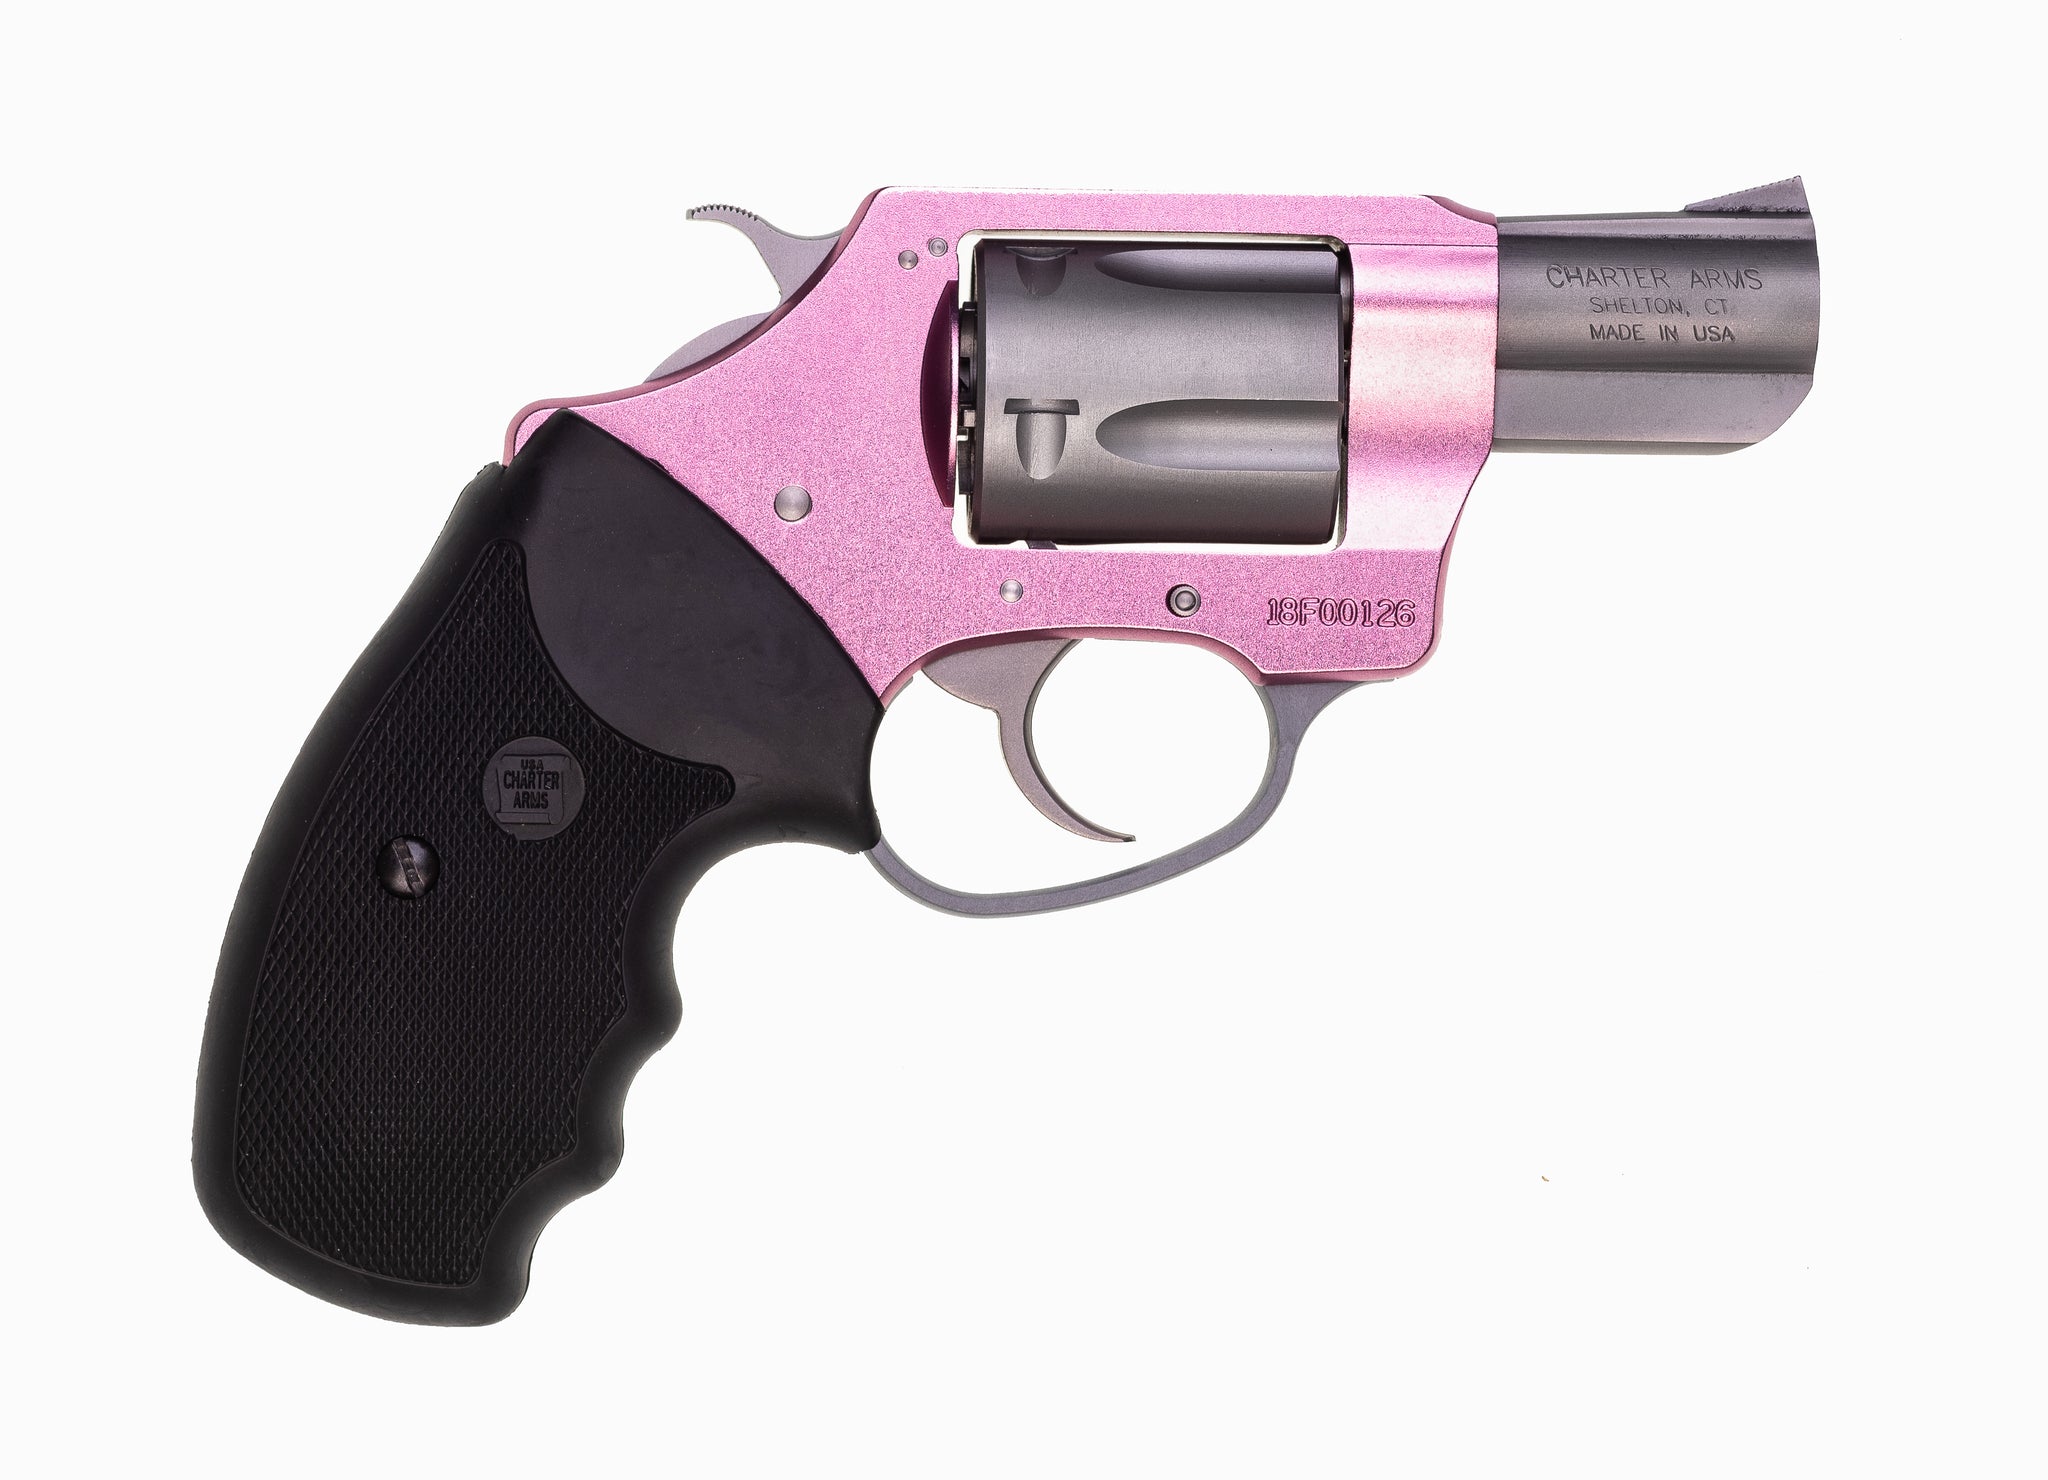 Model 53830 Charter Arms